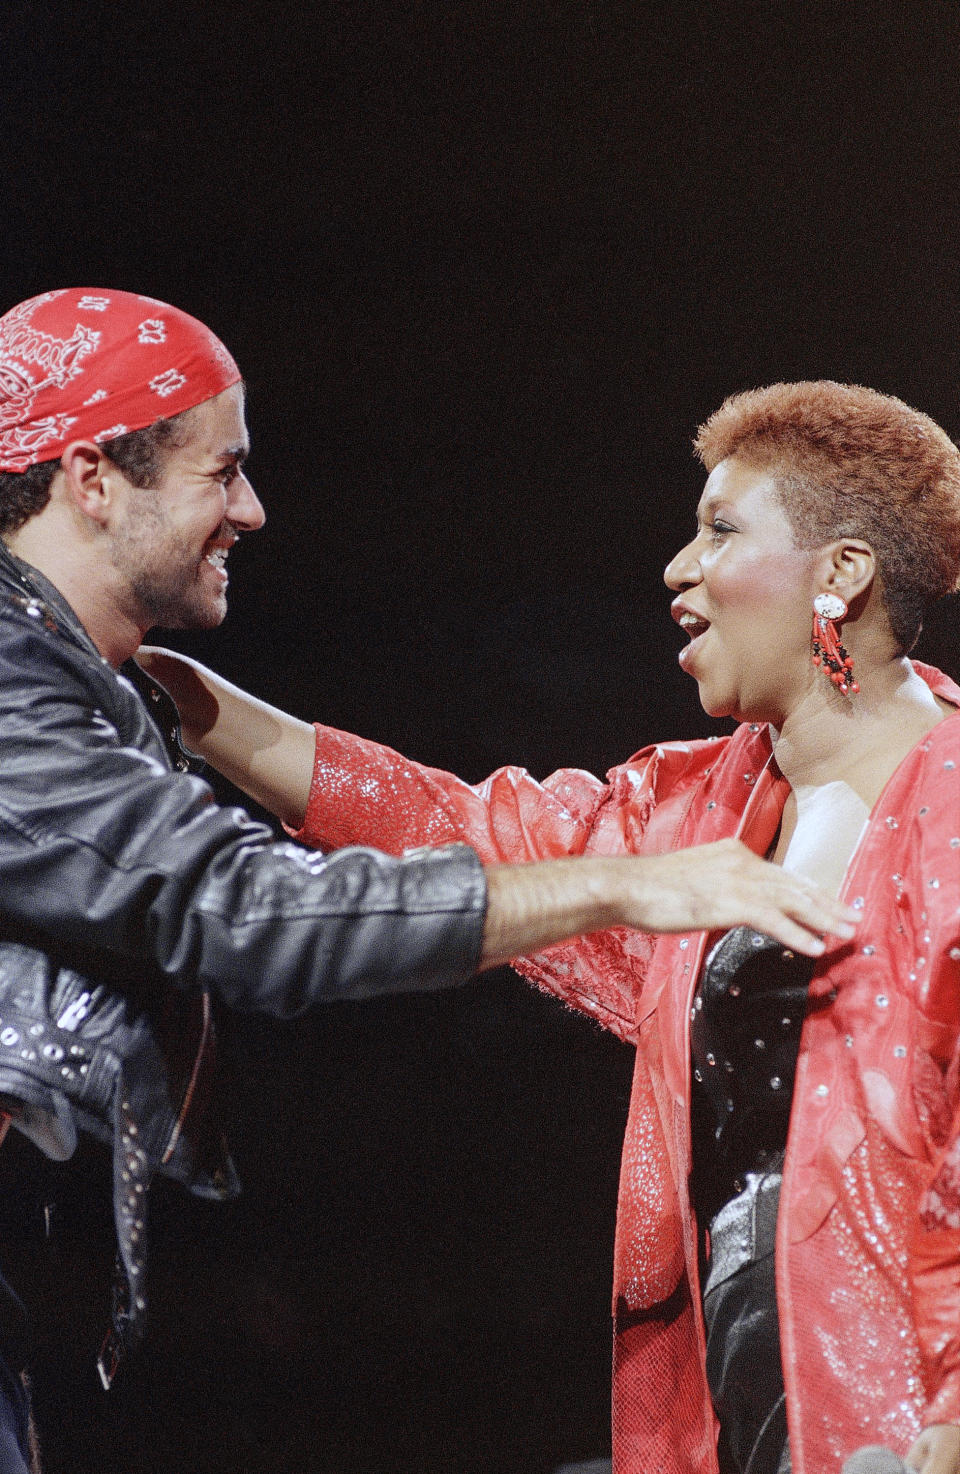 <p>Aretha Franklin, wearing a red leather studded jacket and short auburn haircut, joins George Michael on stage during his Faith World Tour in Detroit. The duo sang their Grammy-winning hit “I Knew You Were Waiting.” (AP Photo/Rob Kozloff) </p>